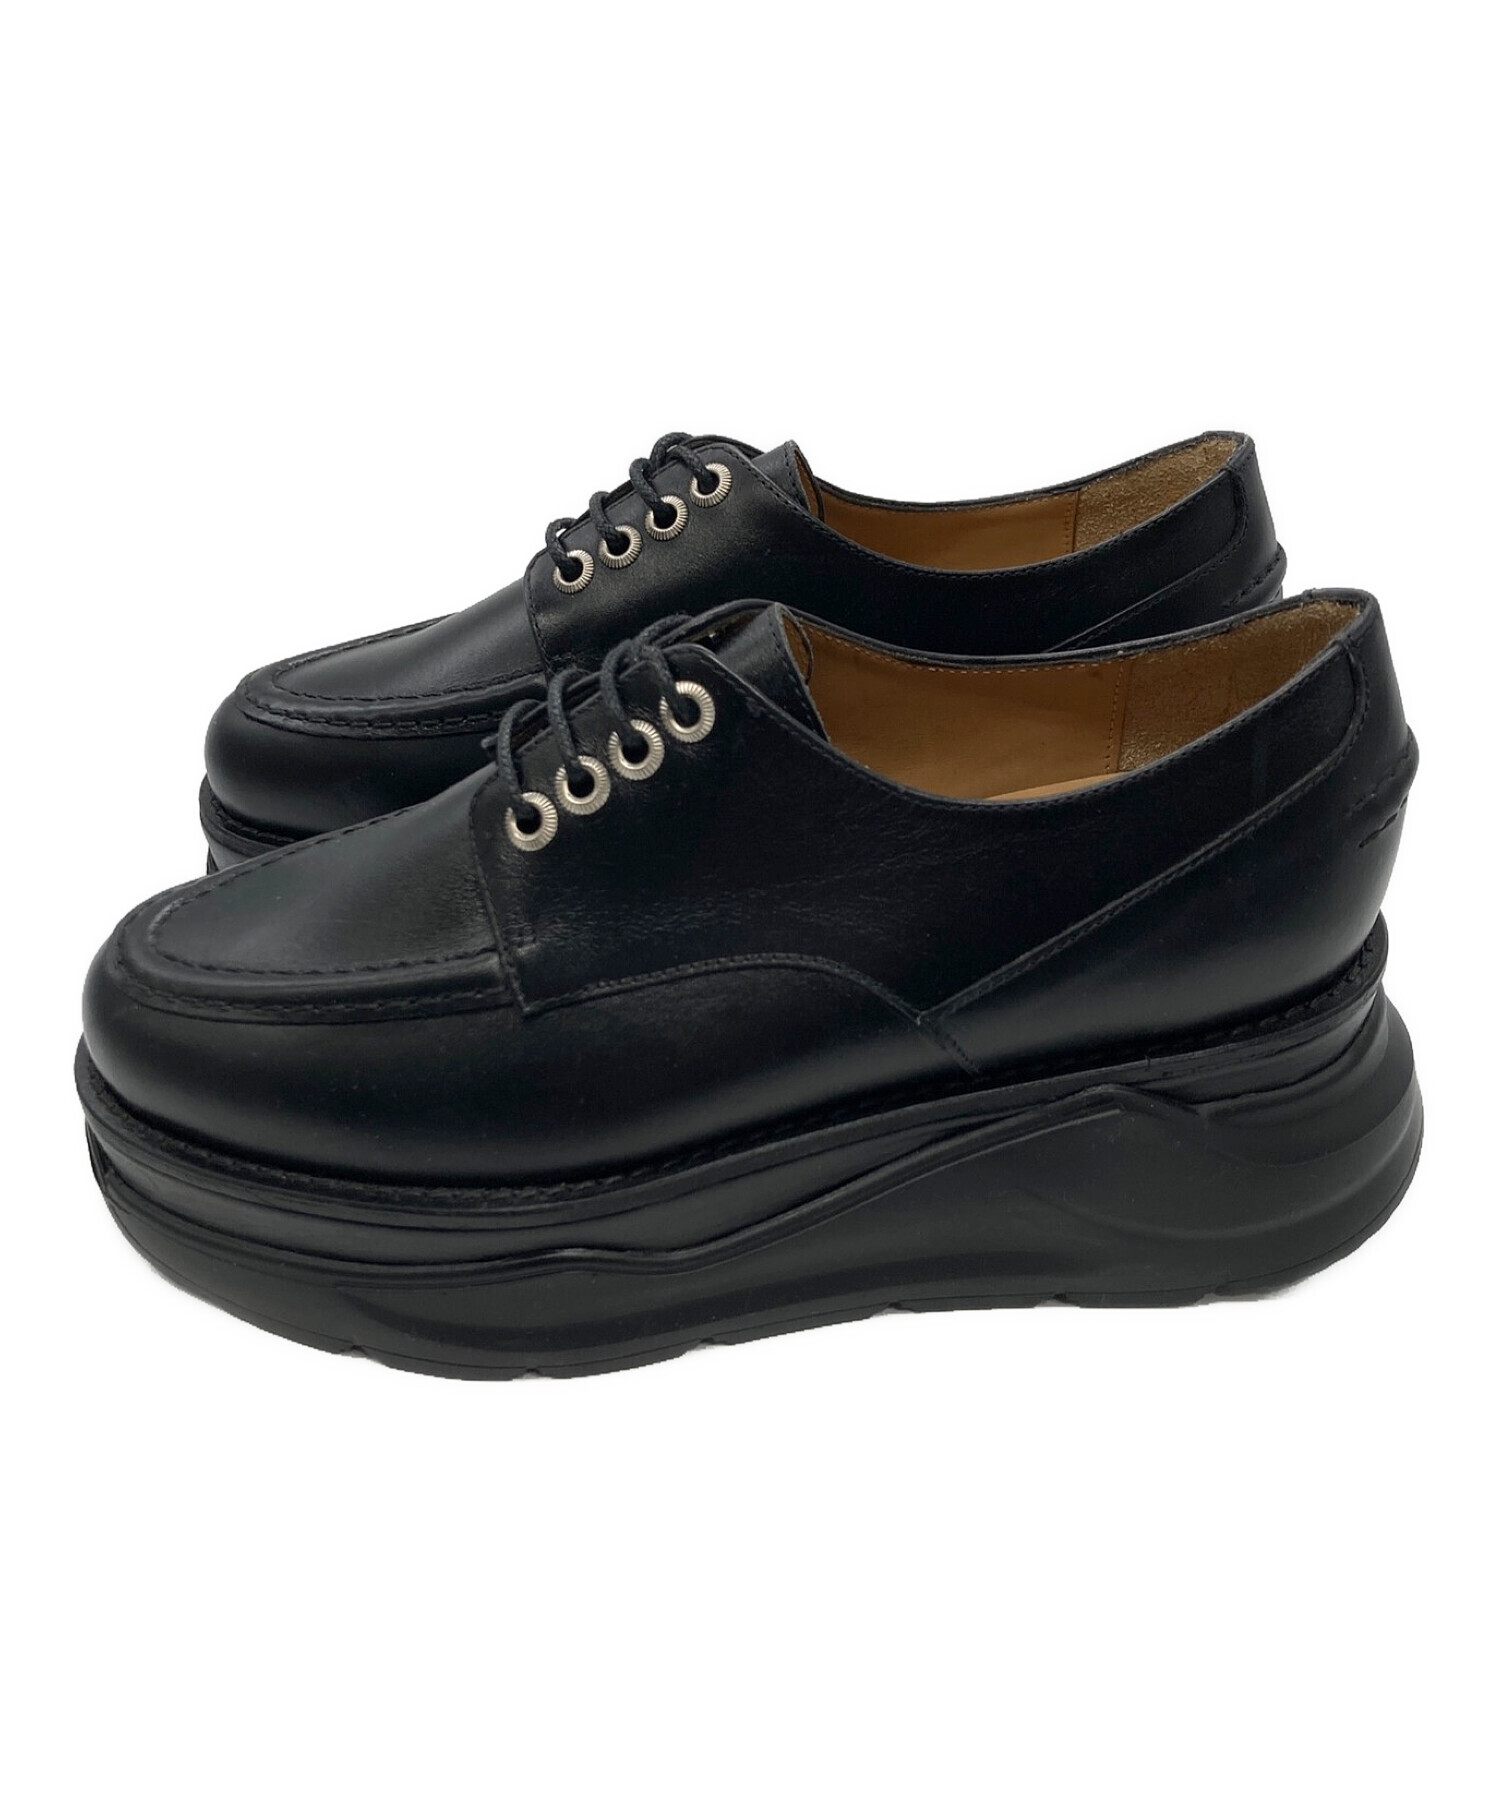 TOGA PULLA SNEAKER SOLE LEATHER SHOES